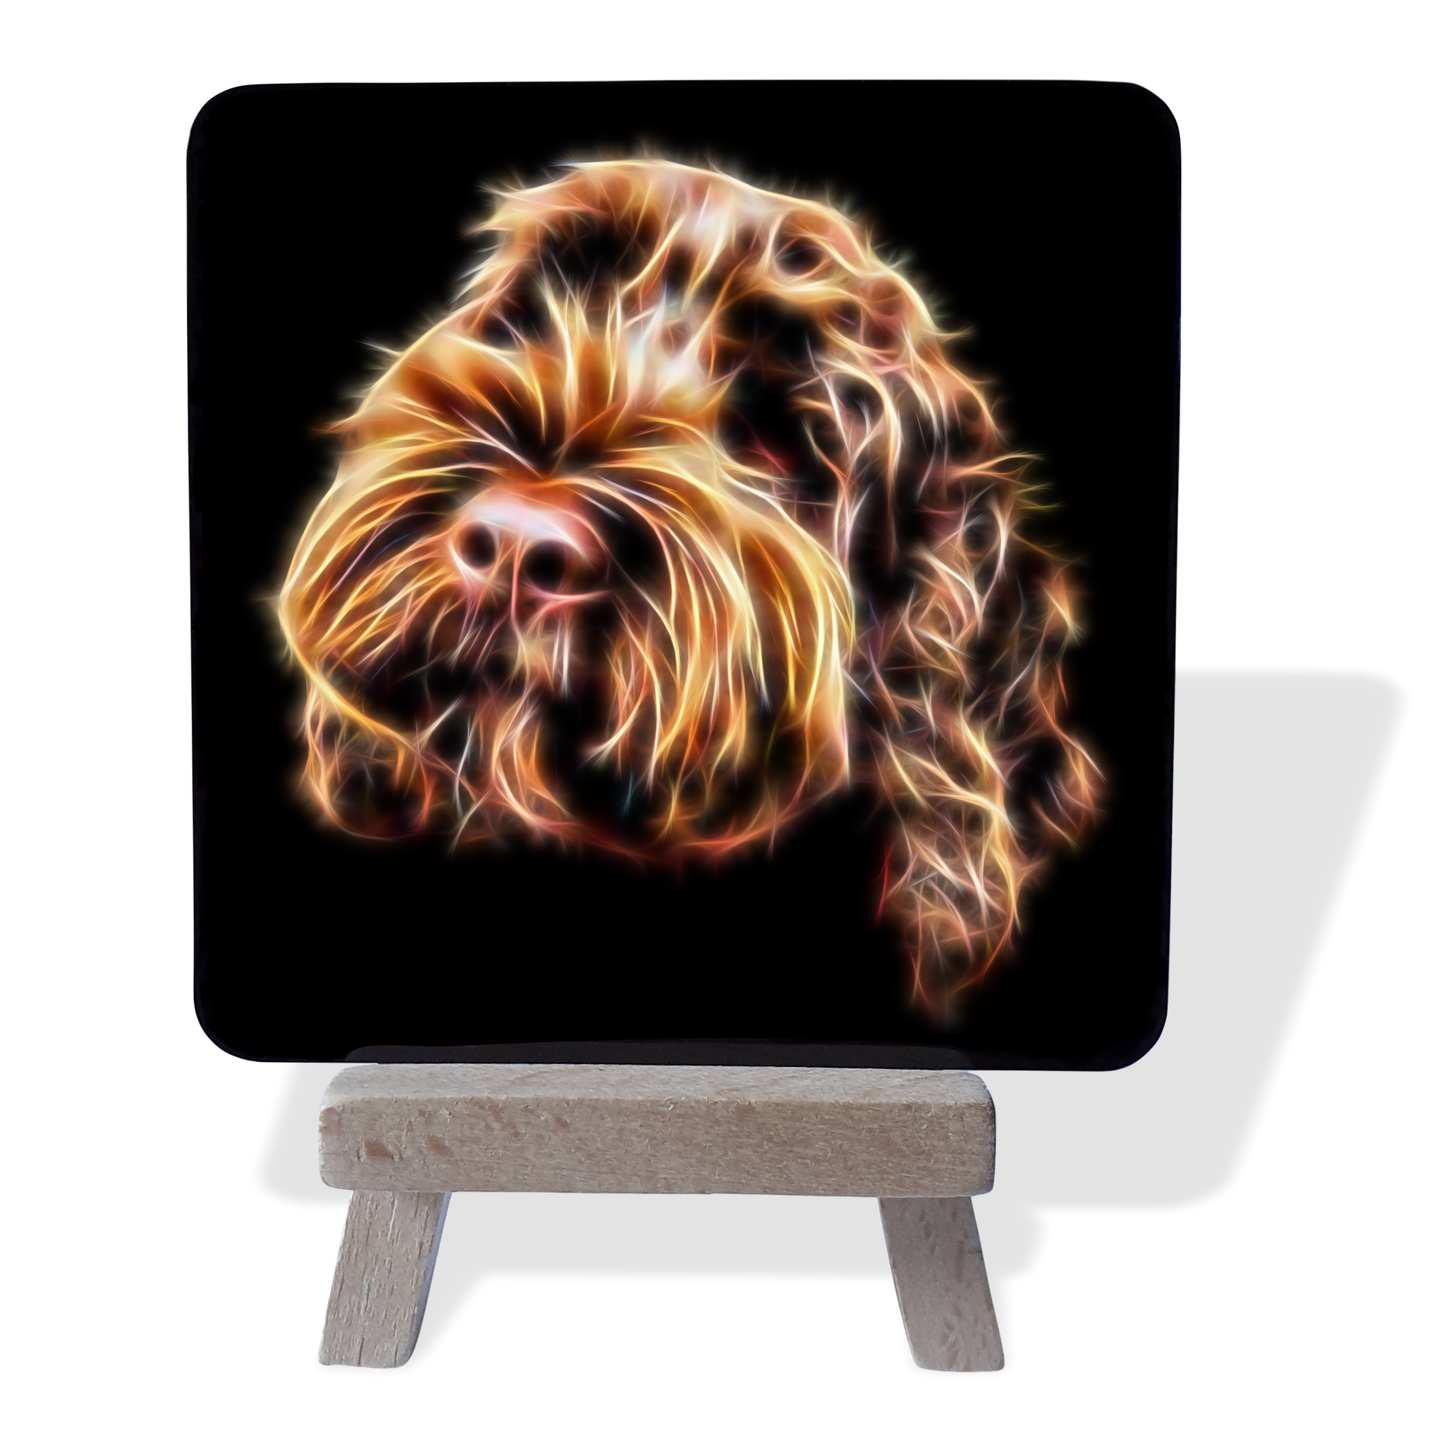 Chocolate Cockapoo #2 Metal Plaque and Mini Easel with Fractal Art Design